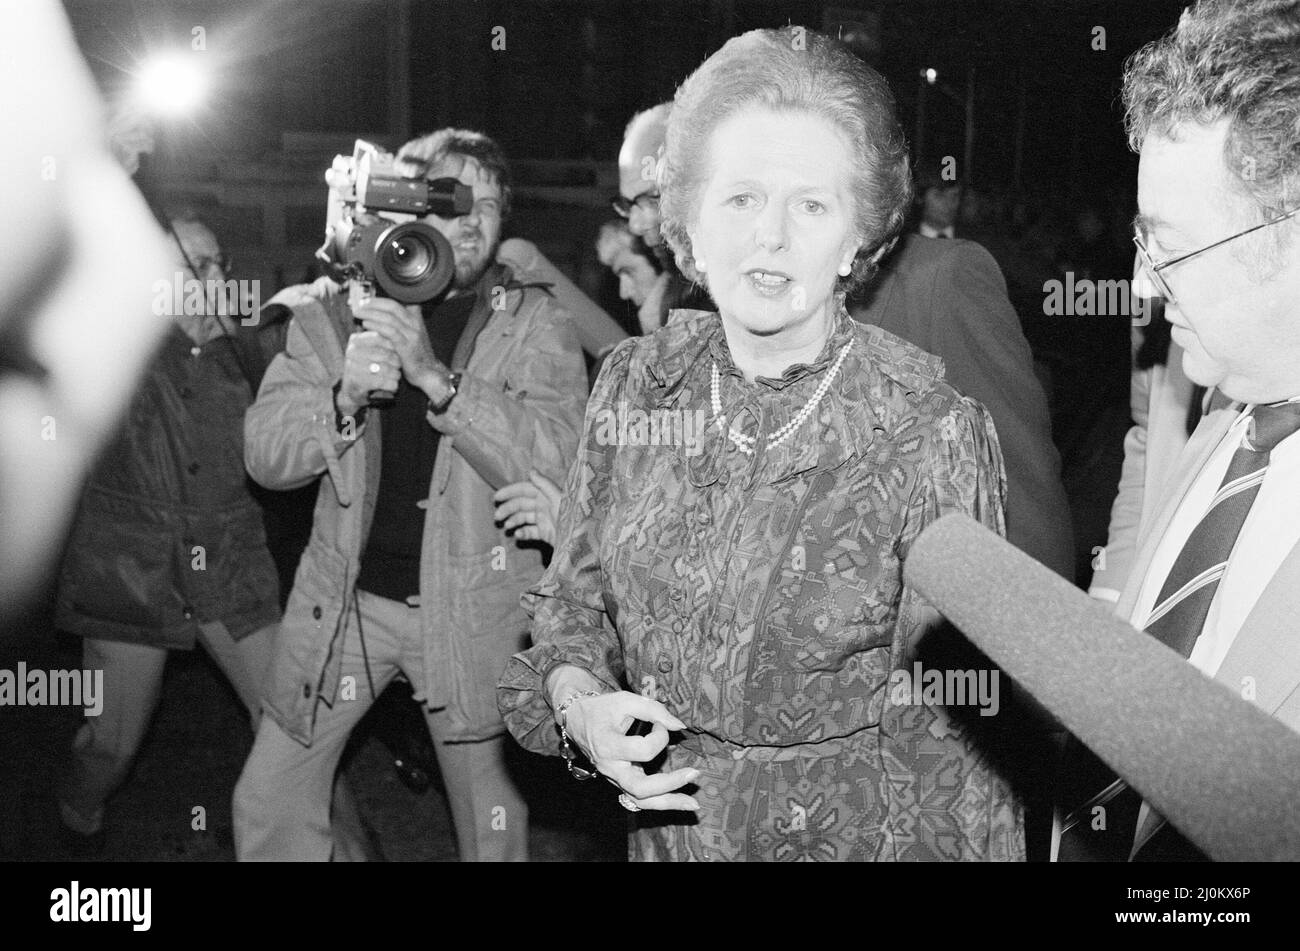 Margaret Thatcher PM pictured speaking to the press outside Downing Street, London, evening of Monday 14th June 1982.  Falklands Conflict. A ceasefire was declared on 14th June and the commander of the Argentine garrison in Stanley, surrendered to Major General Jeremy Moore the same day. Stock Photo